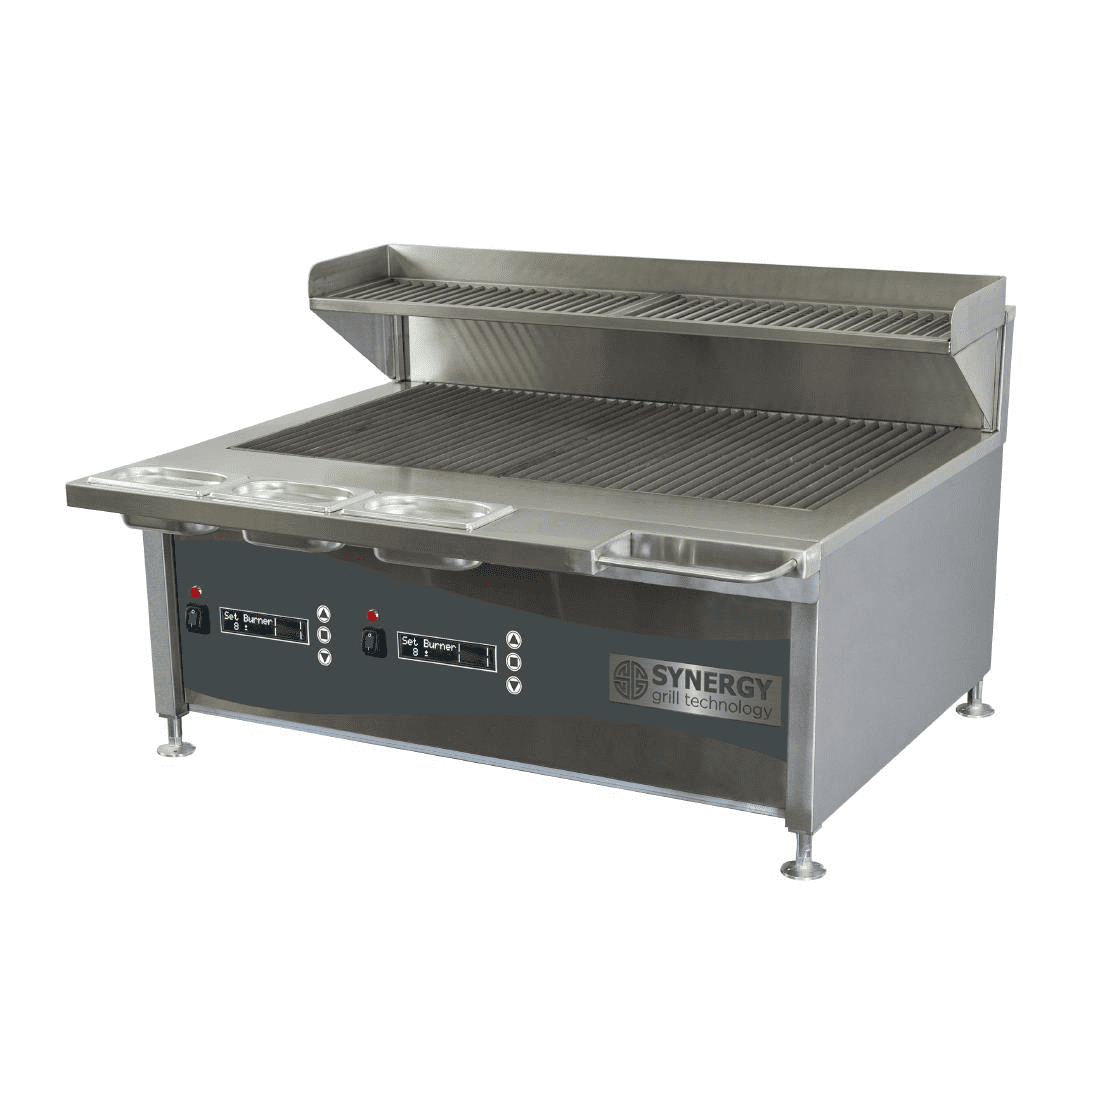 FD490 Synergy Grill Gas Trilogy Chargrill ST900 FD490